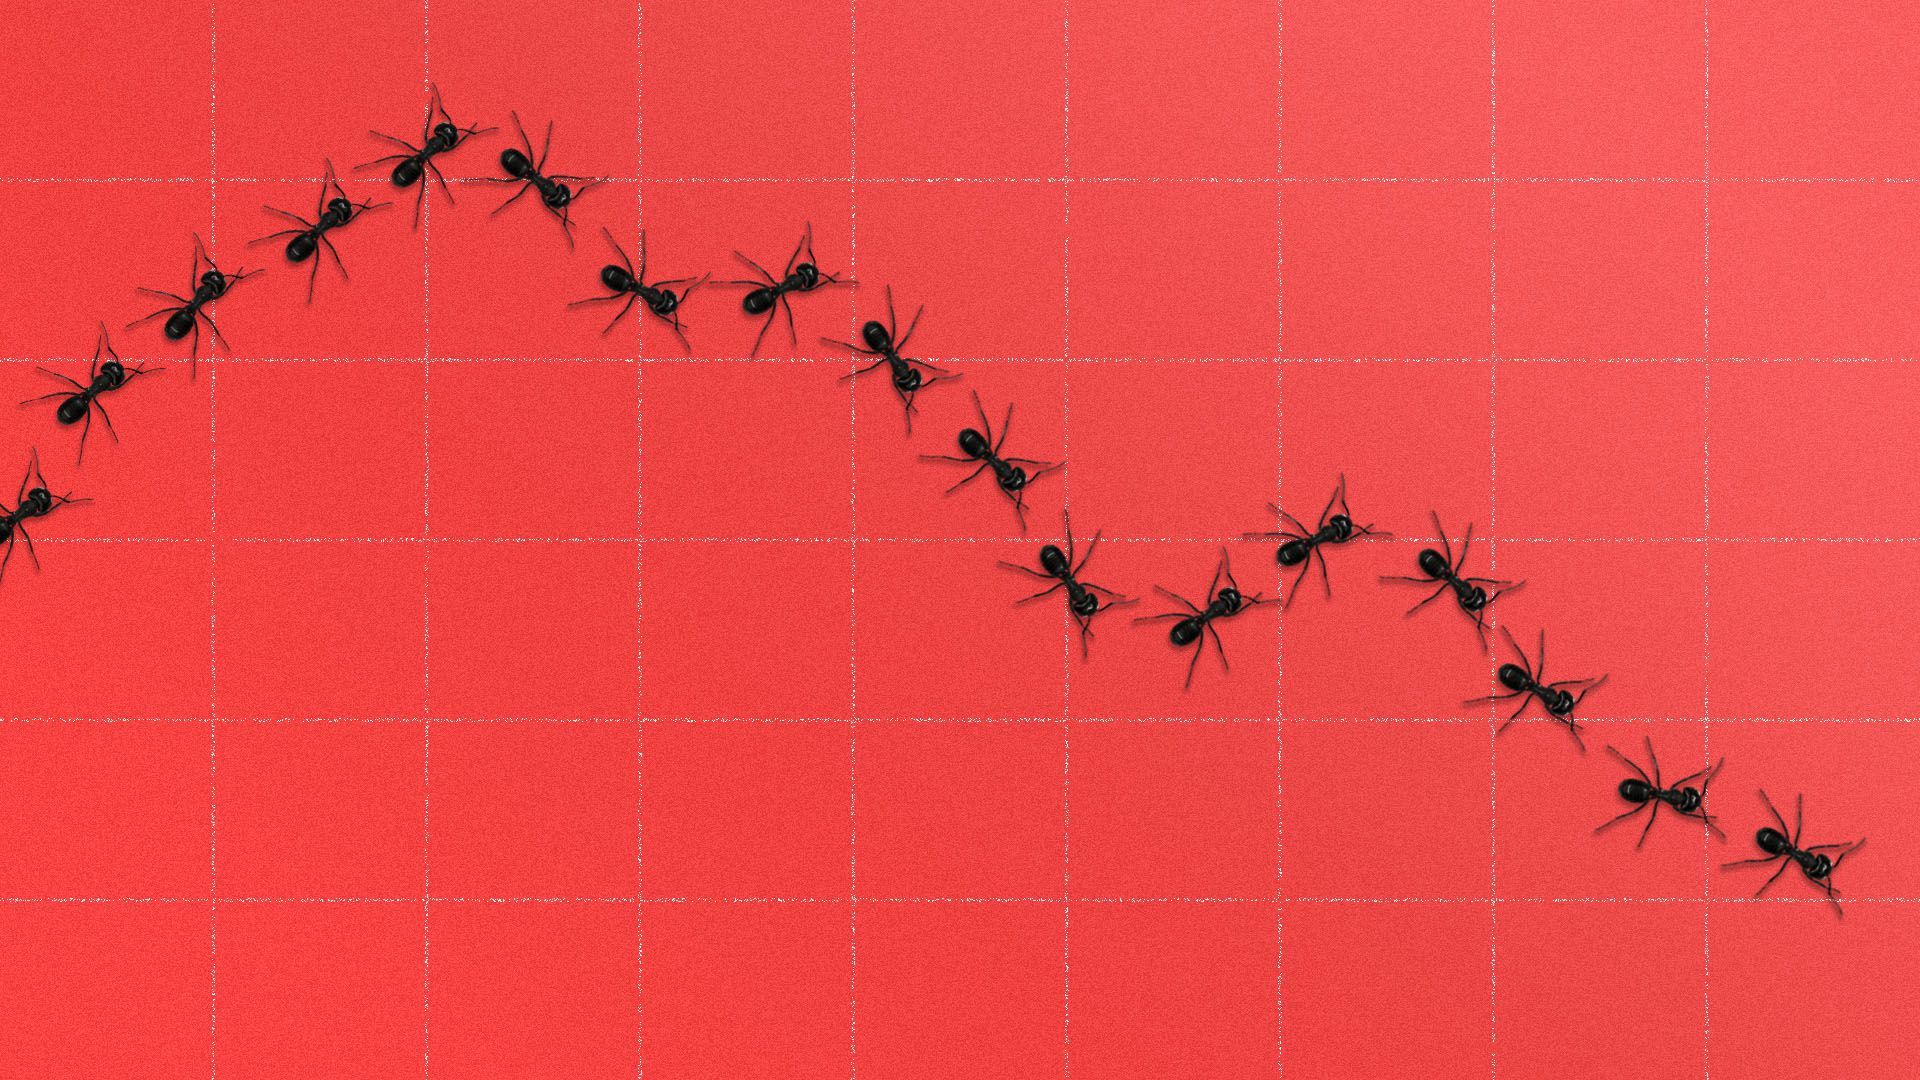 Illustrations of ants marching in a downward trend line across a grid